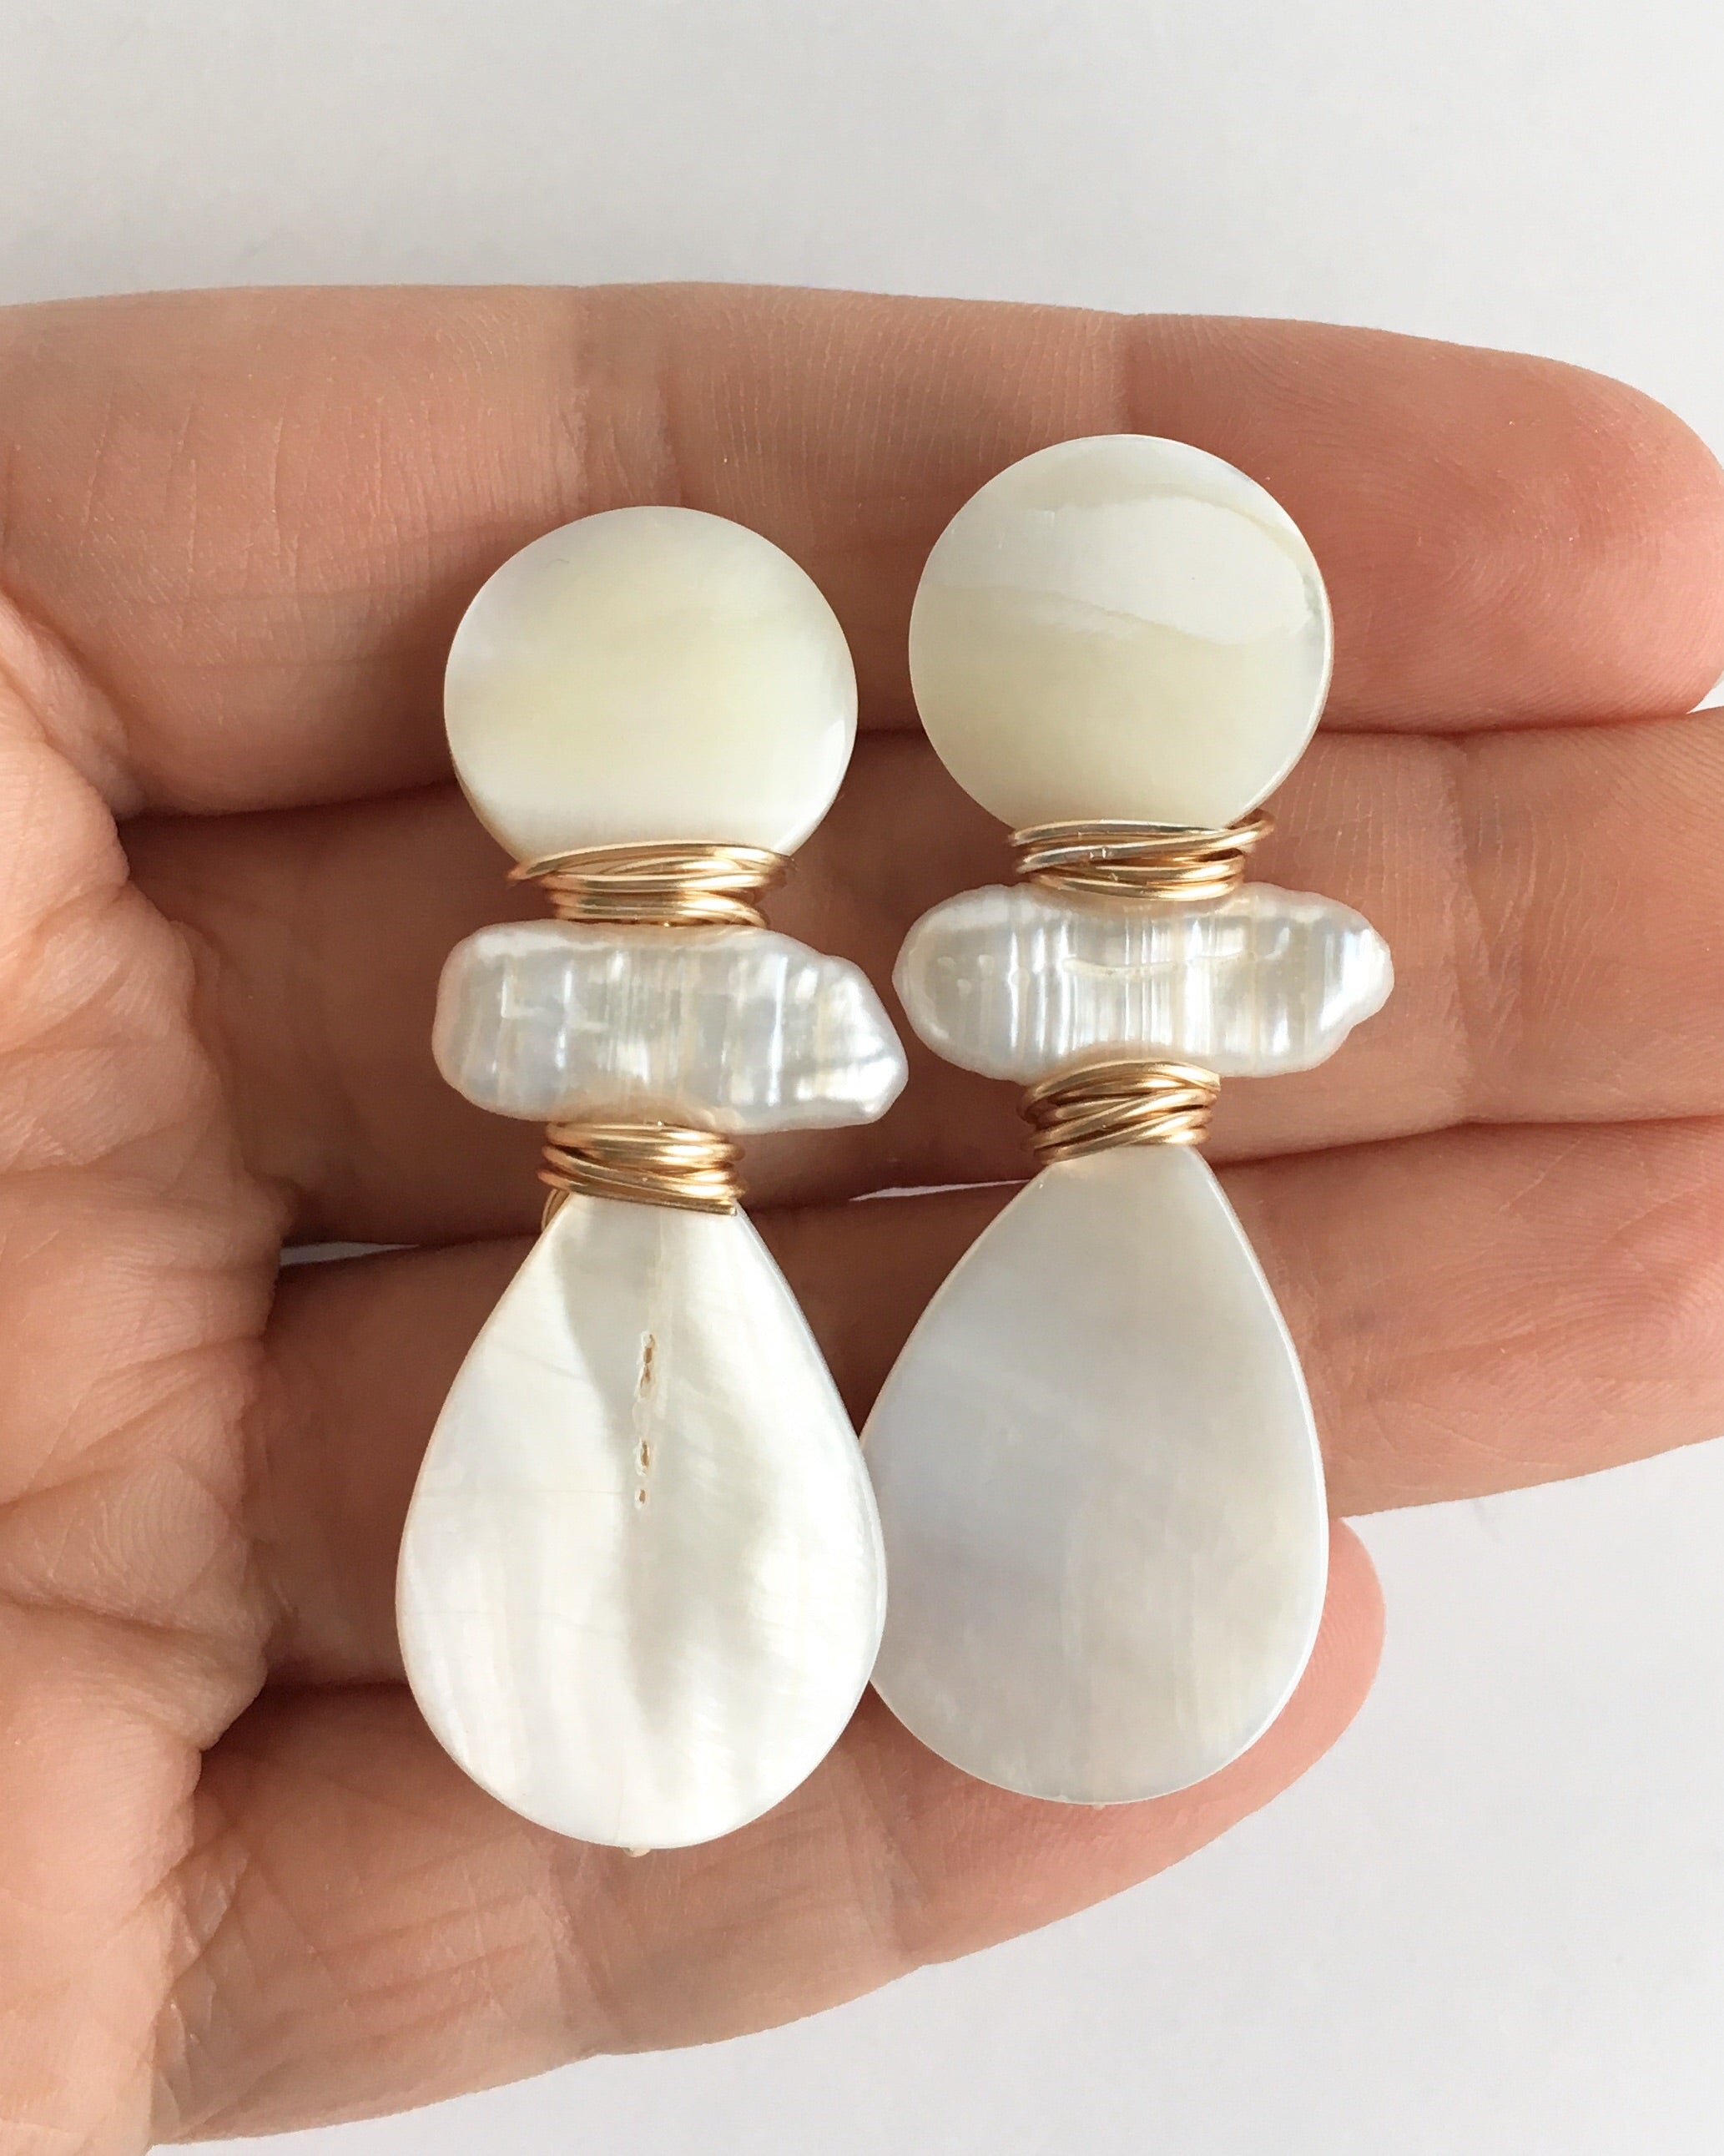 Three Stone Mother of Pearl and Pearl Teardrop Earrings displayed on hand